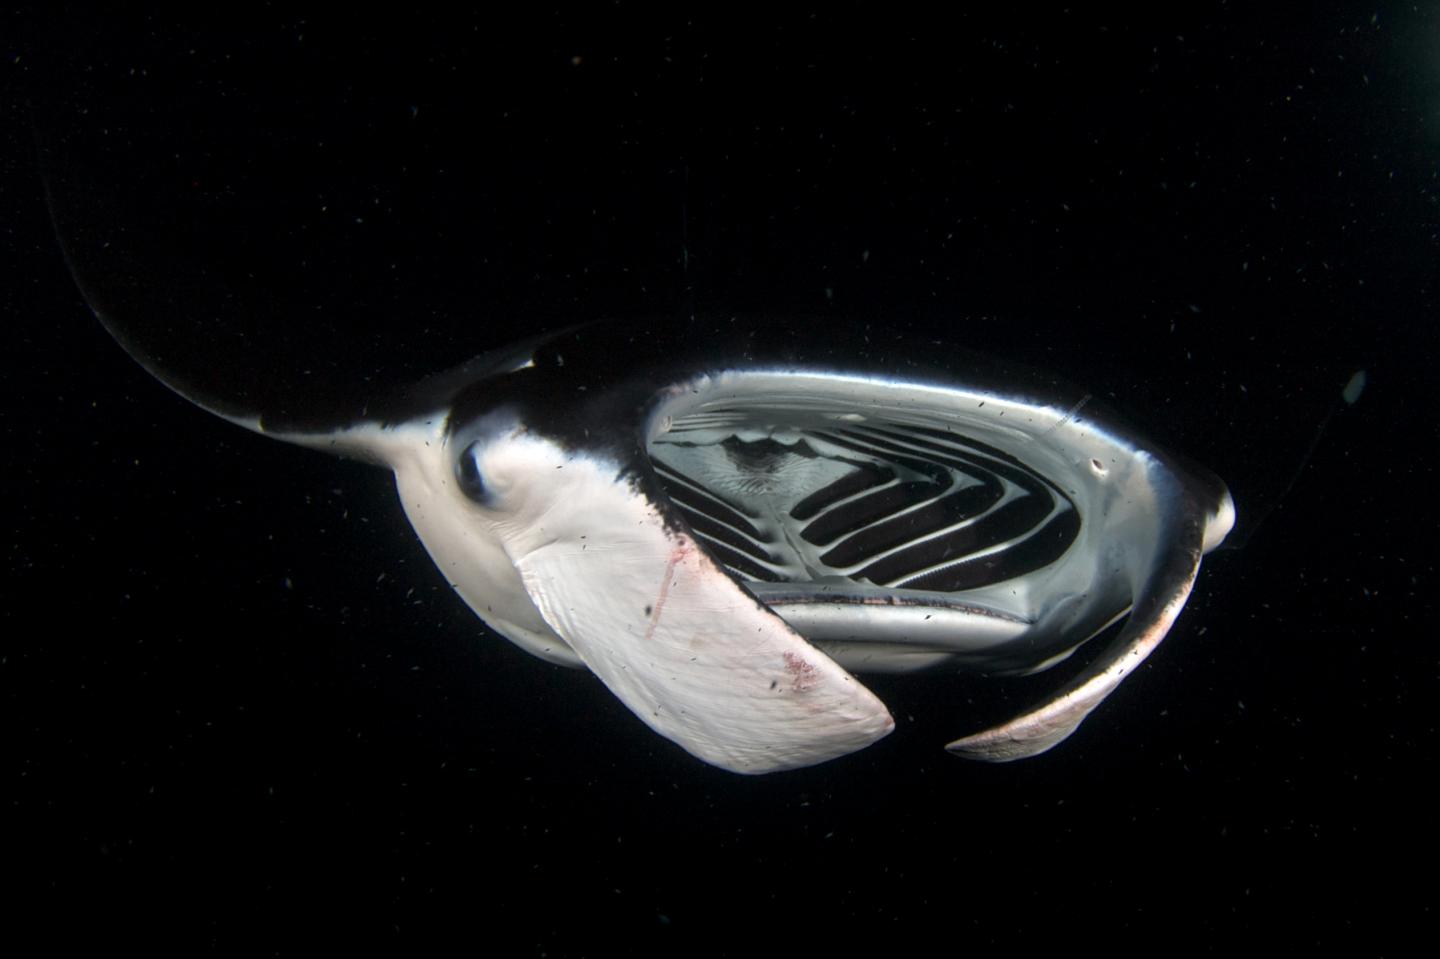 Manta Rays Could Teach Us a Thing or Two About Effective Filtration